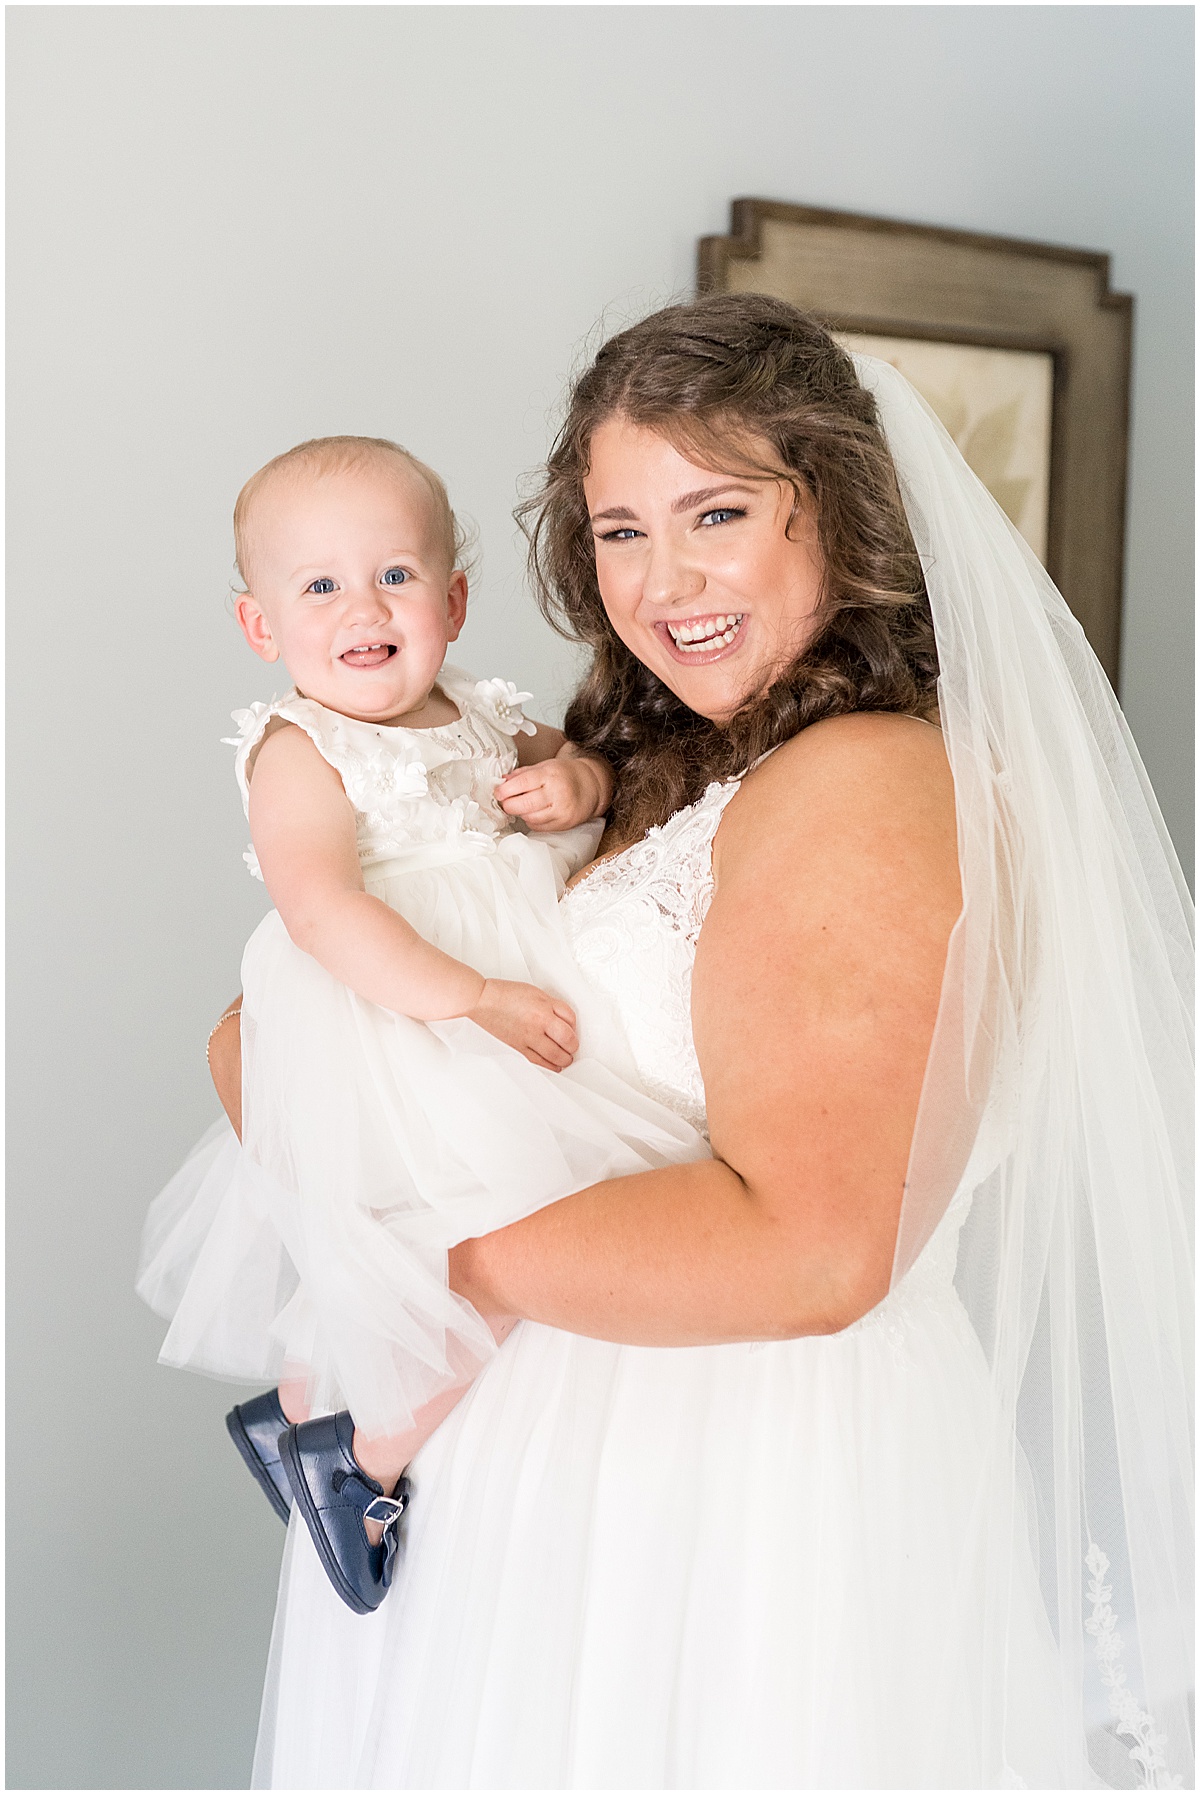 Bride portraits at outdoor private property wedding in Frankfort, Indiana by Victoria Rayburn Photography